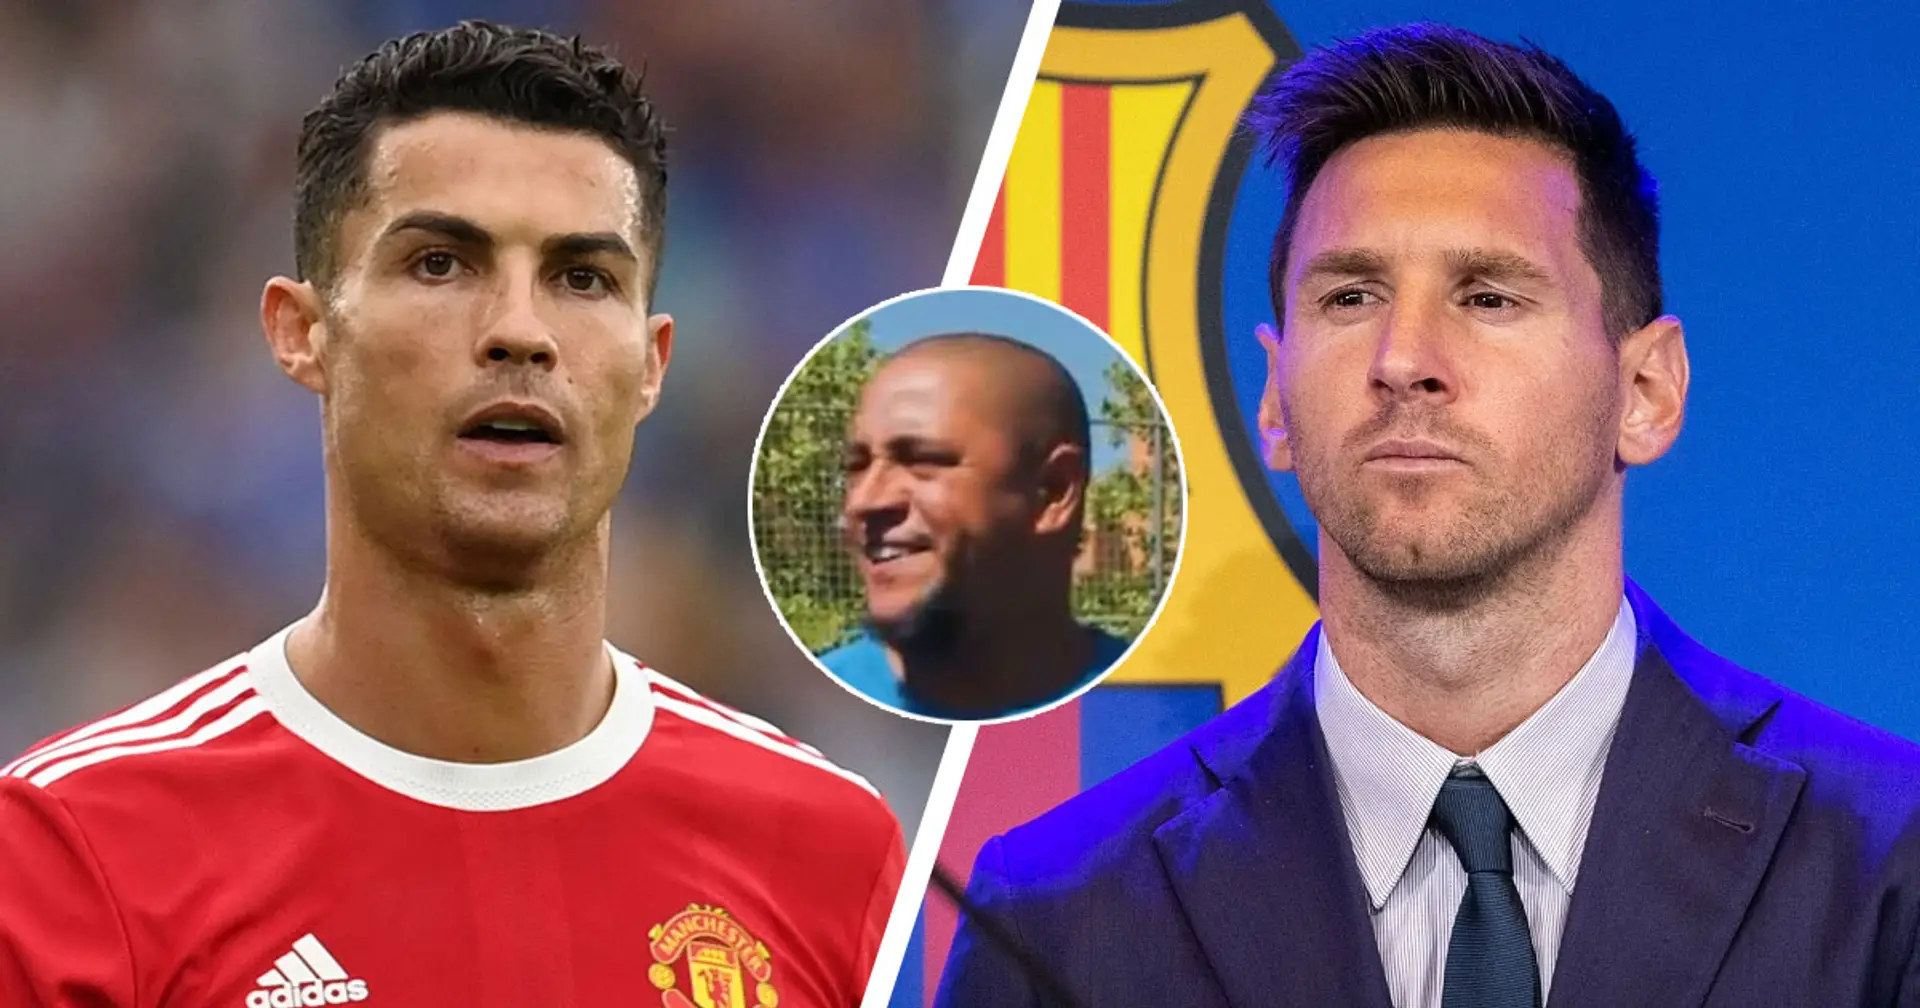 Roberto Carlos delivers surprising answer to Messi or Ronaldo question - Madrid fans will love it